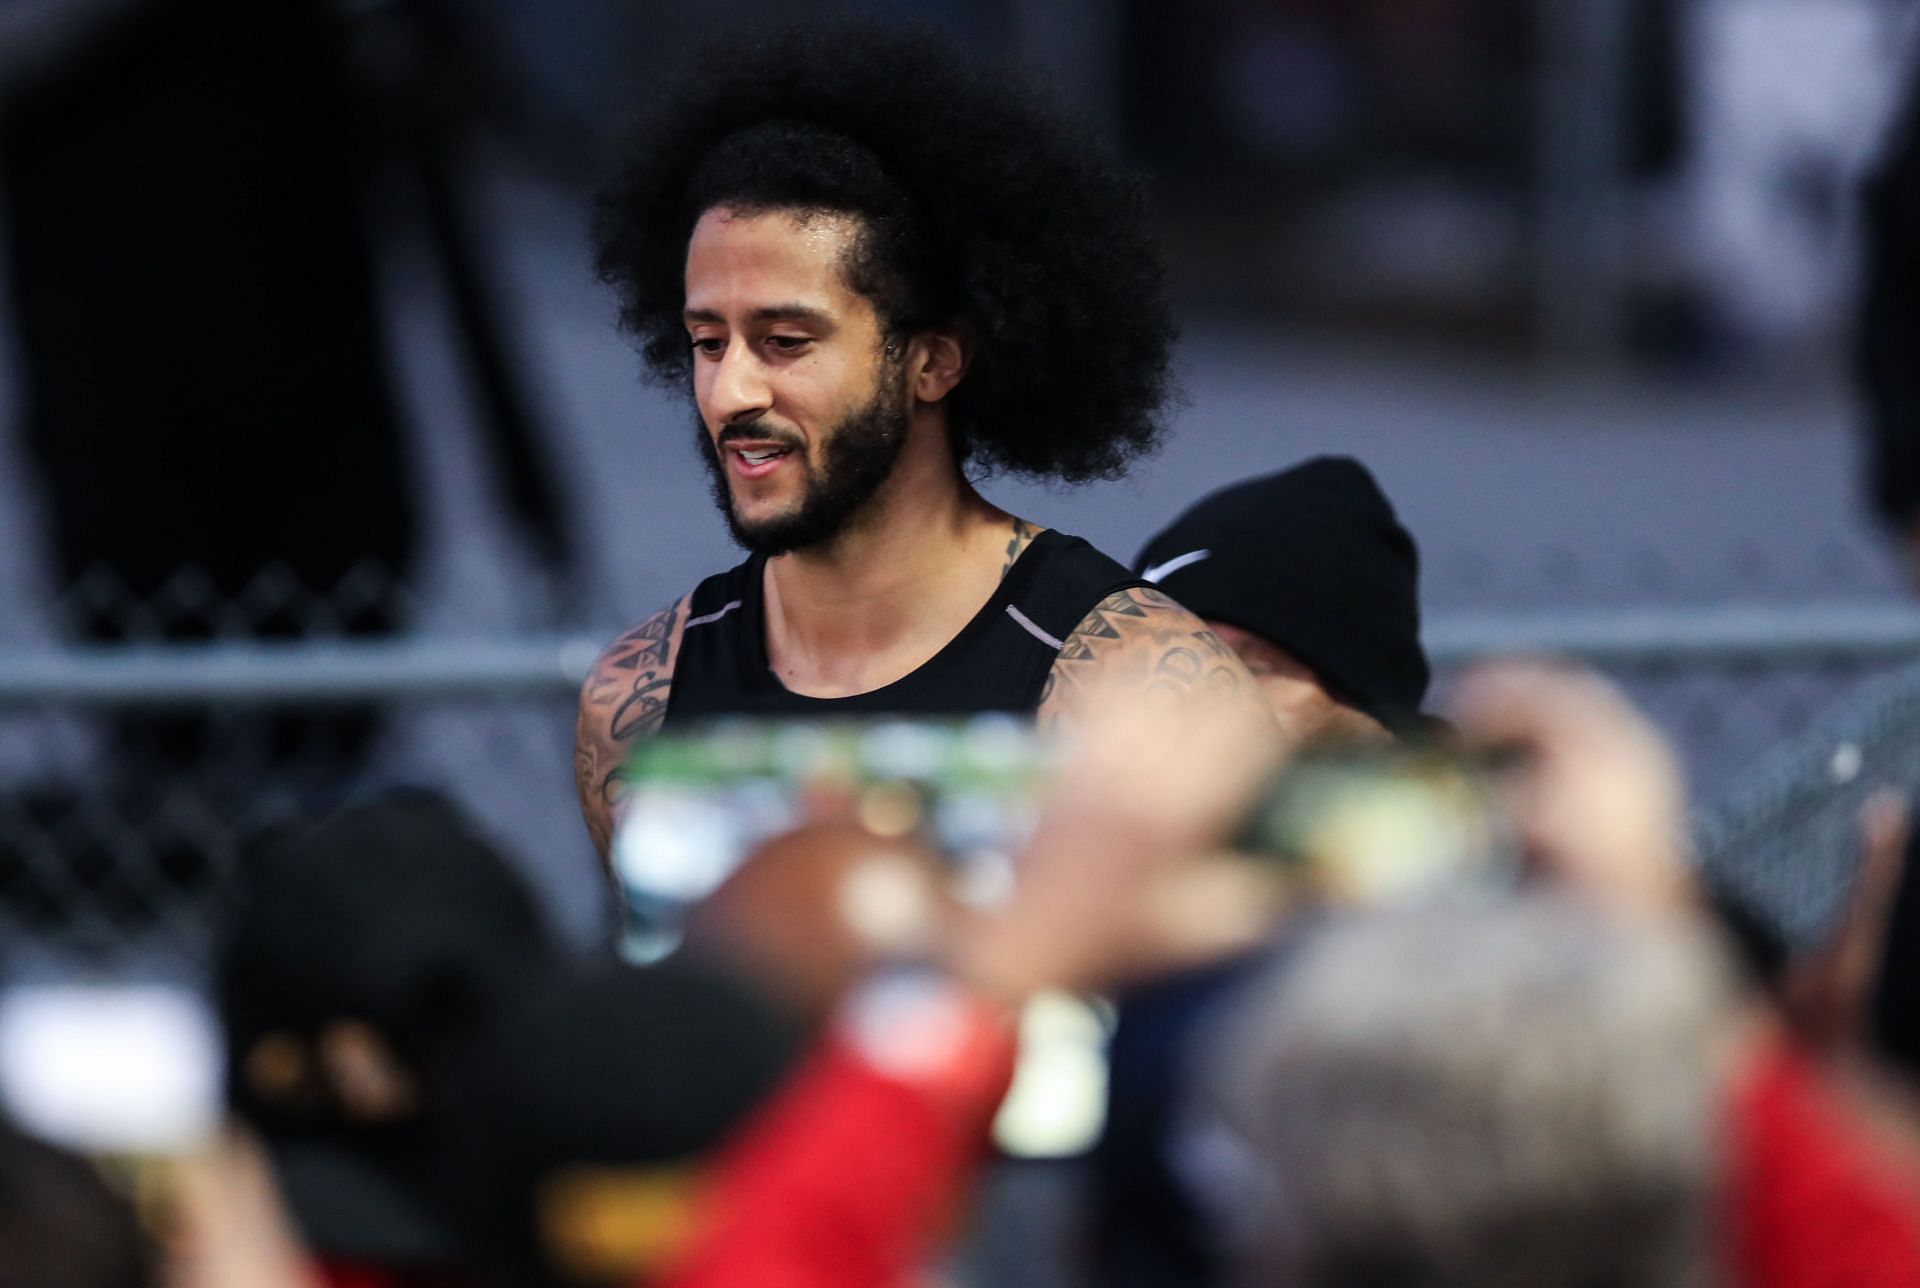 Kaepernick seen during his last public workout in November 2019 (Photo: Getty)